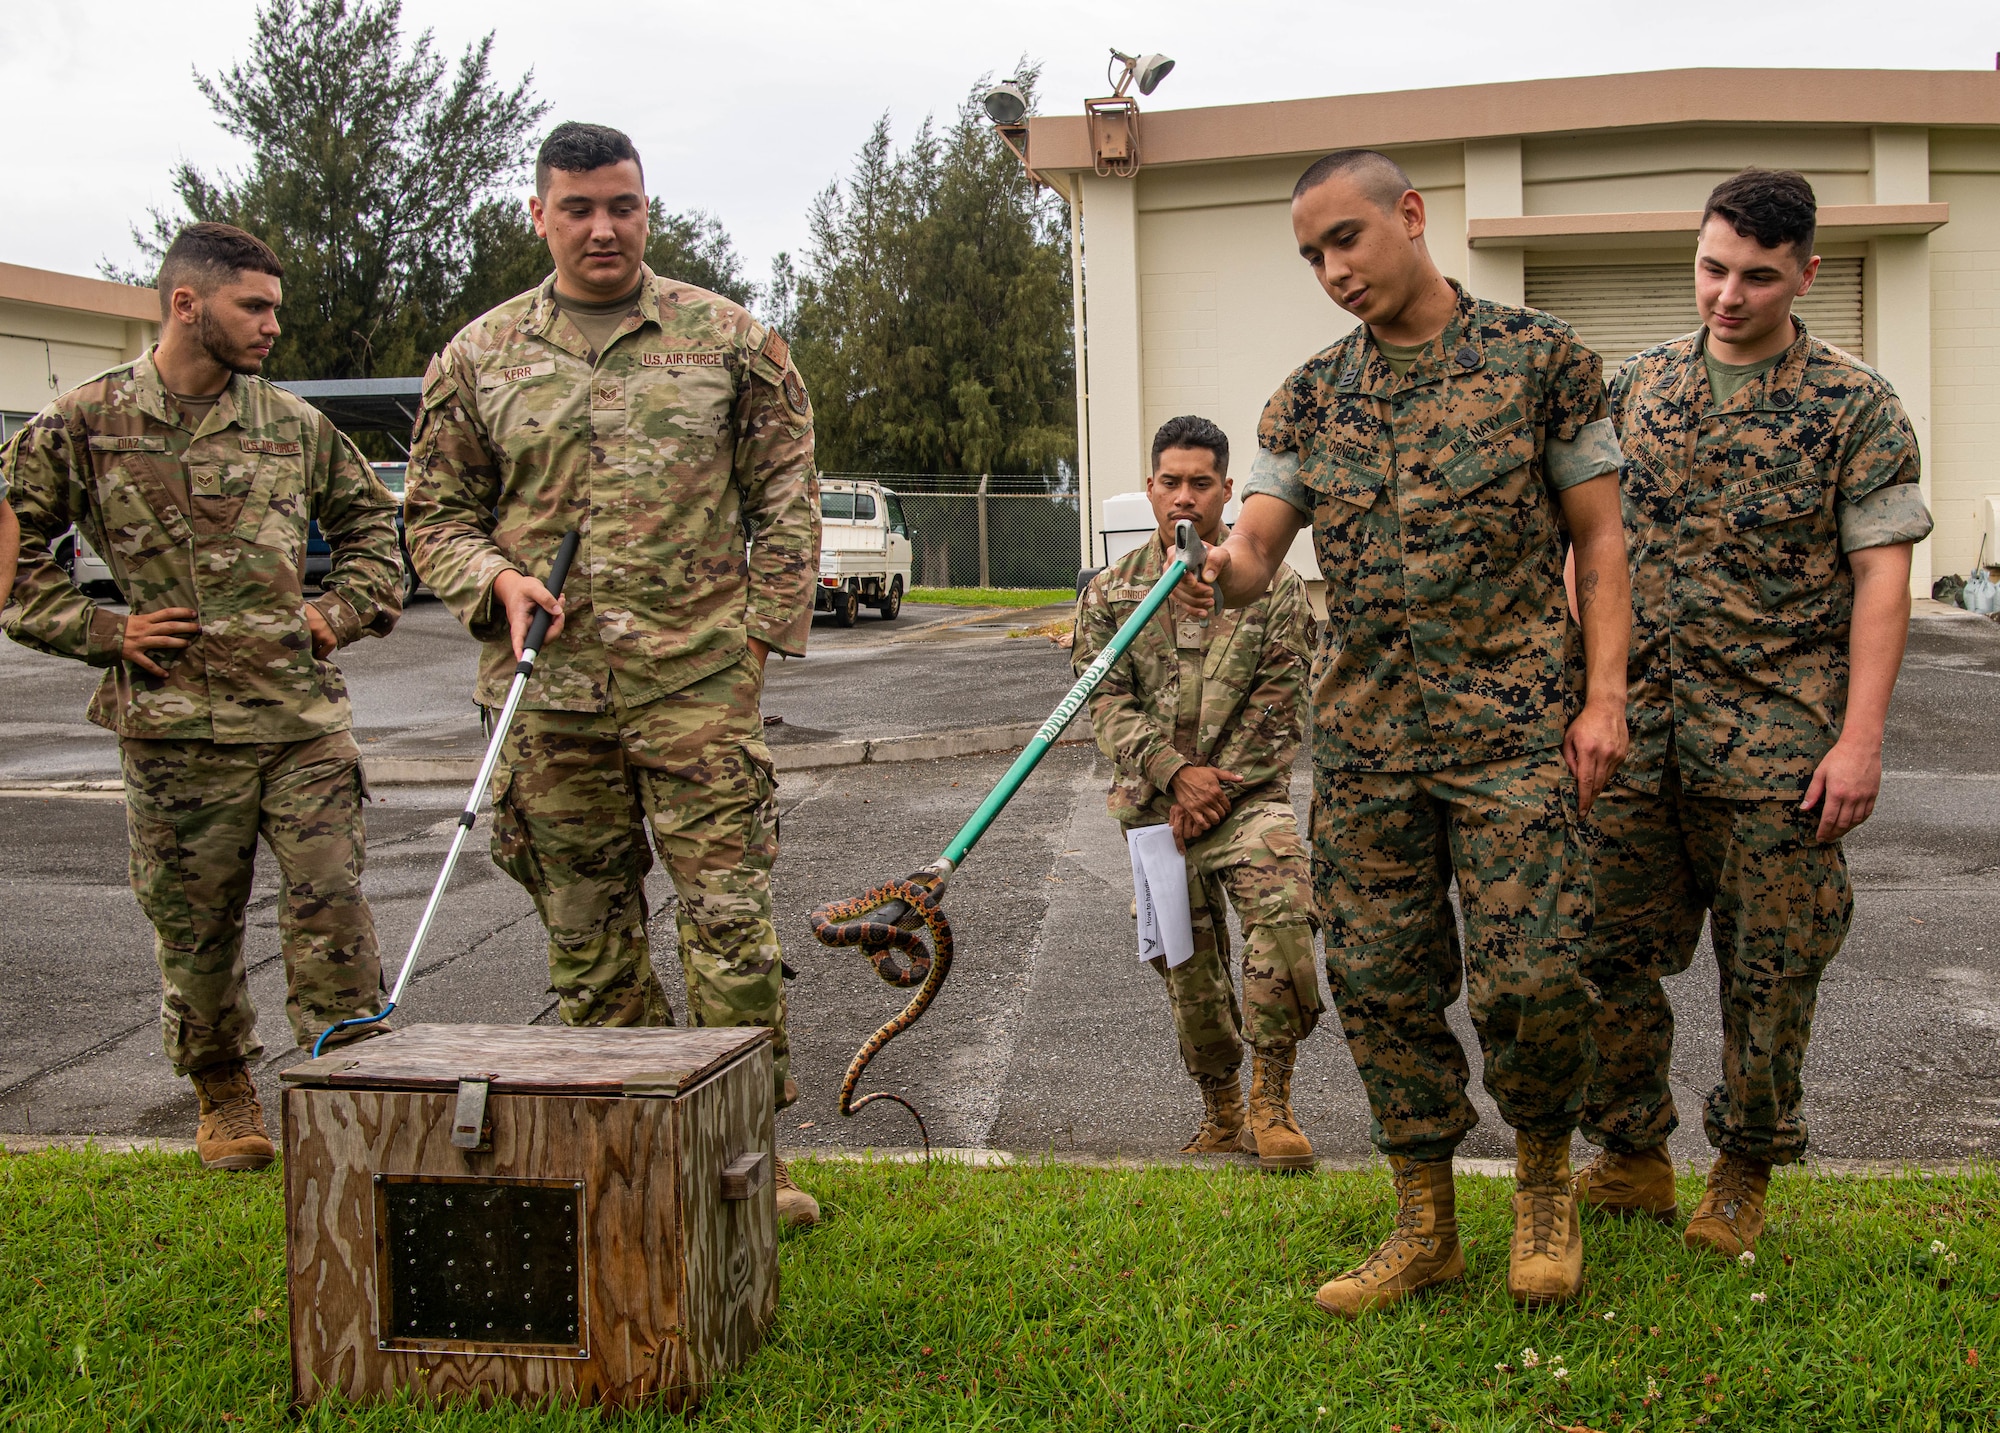 Airmen and Sailors handle snakes.